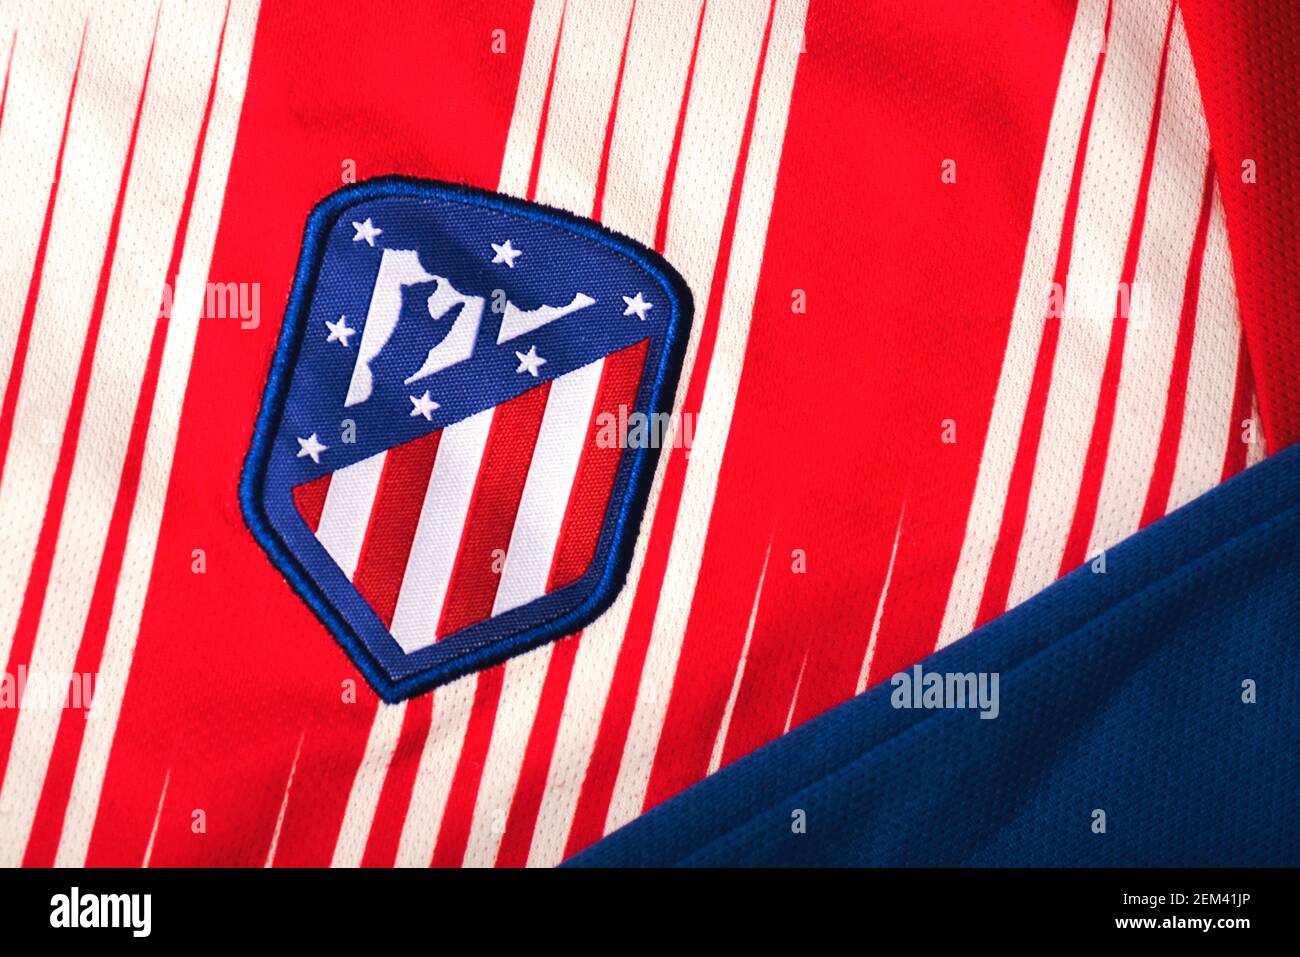 Atletico Madrid Logo High Resolution Stock Photography And Images Alamy